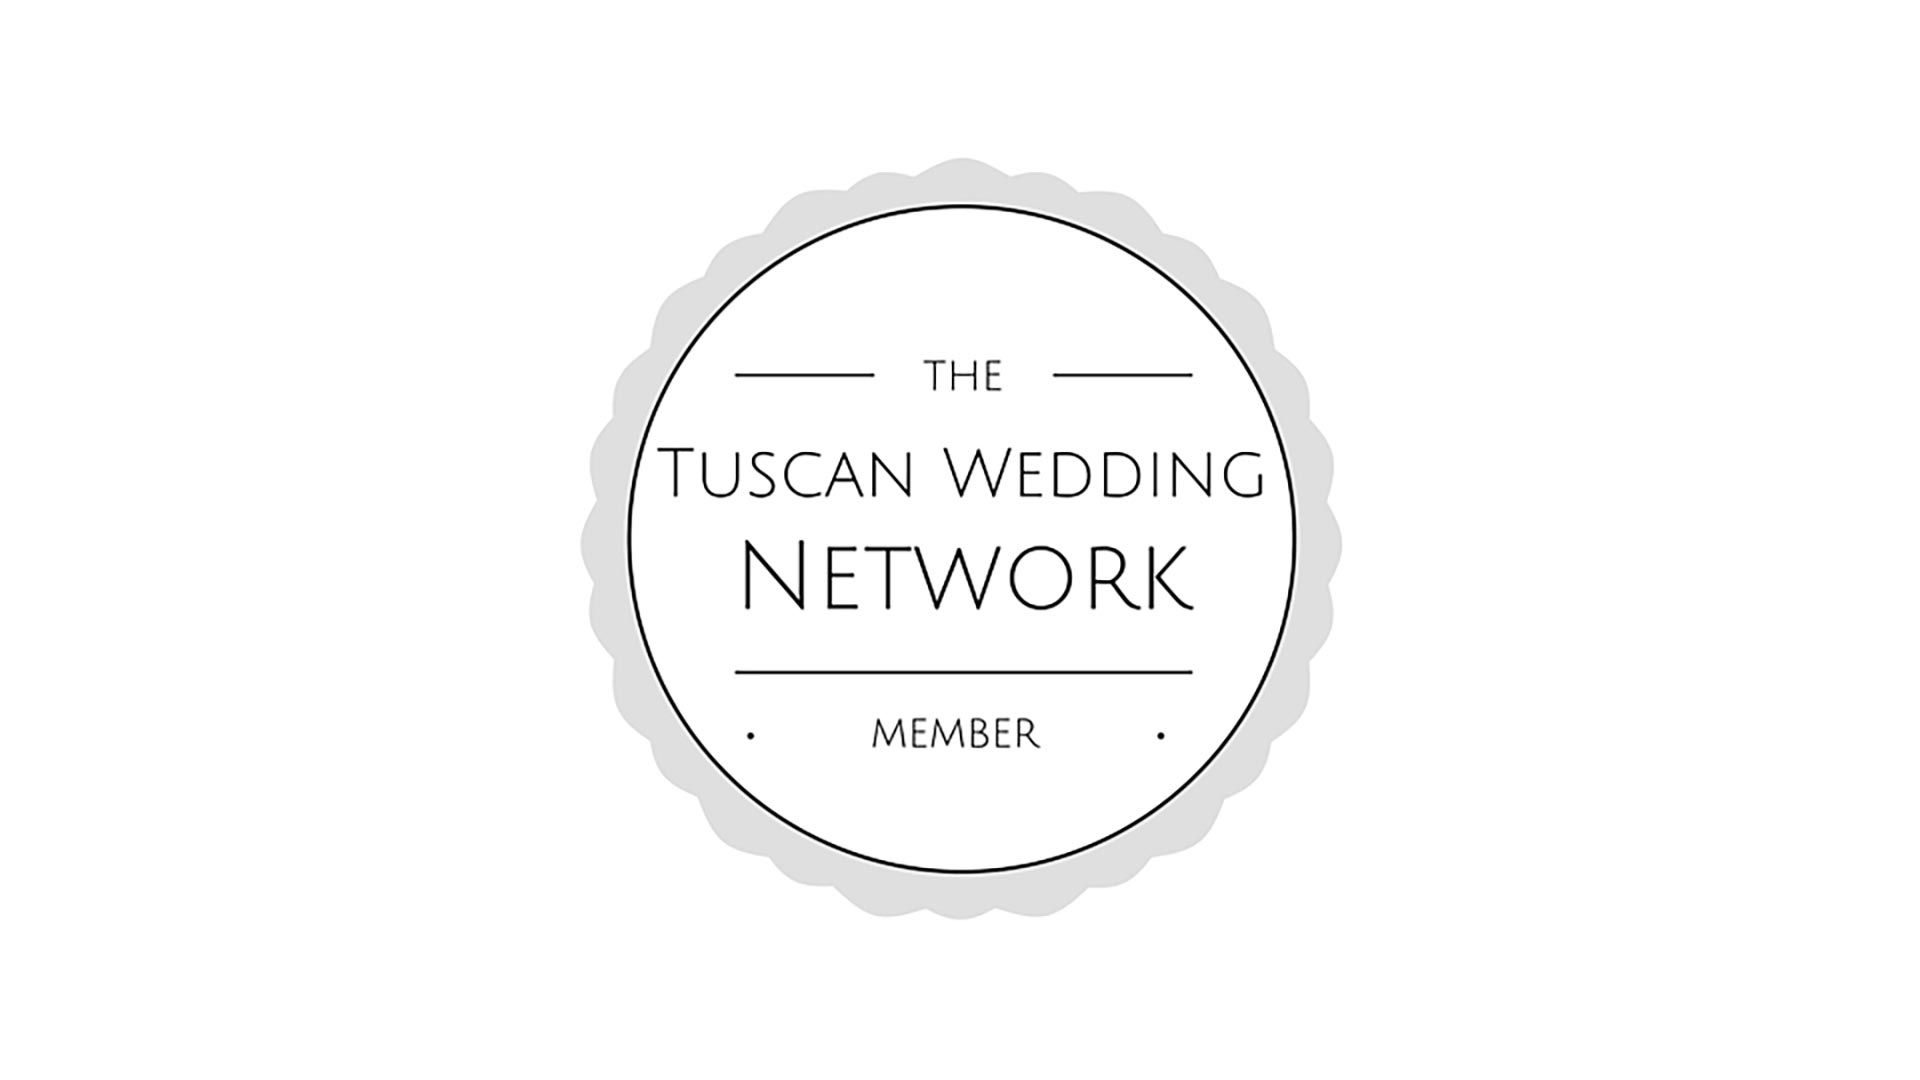 ToscanaDrone & The Tuscan Wedding Network